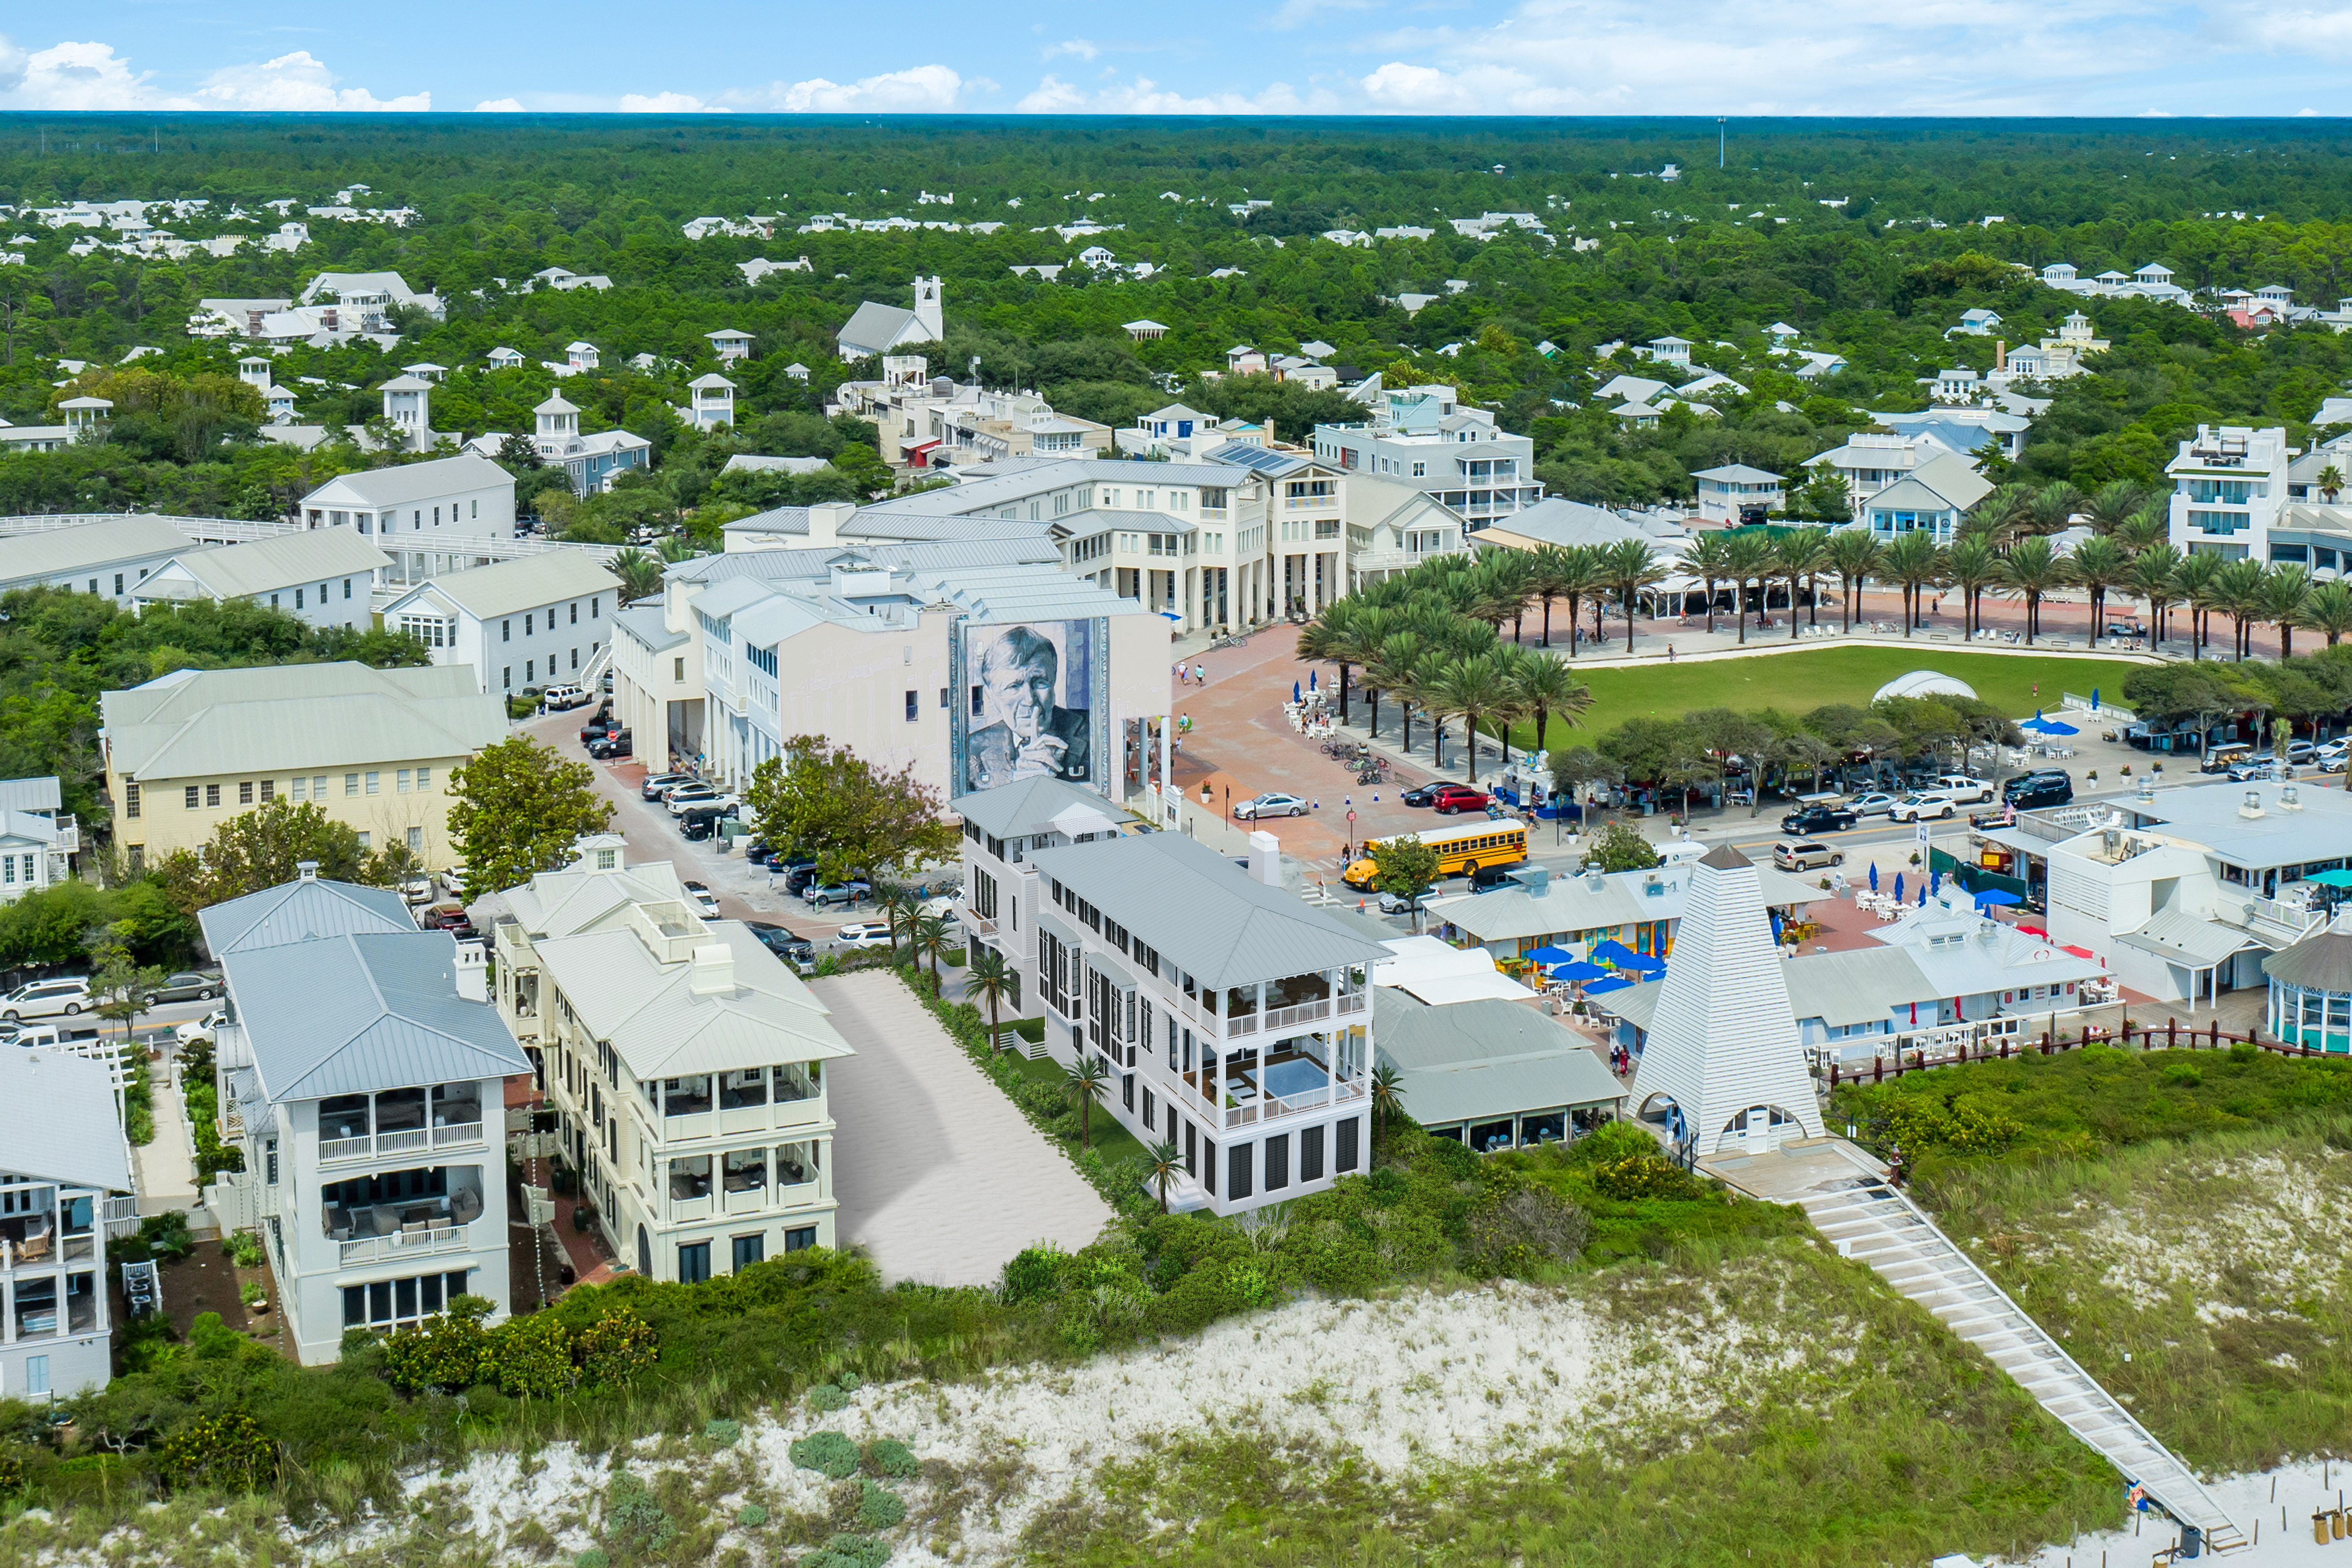 An aerial view of homes and businesses in Seaside